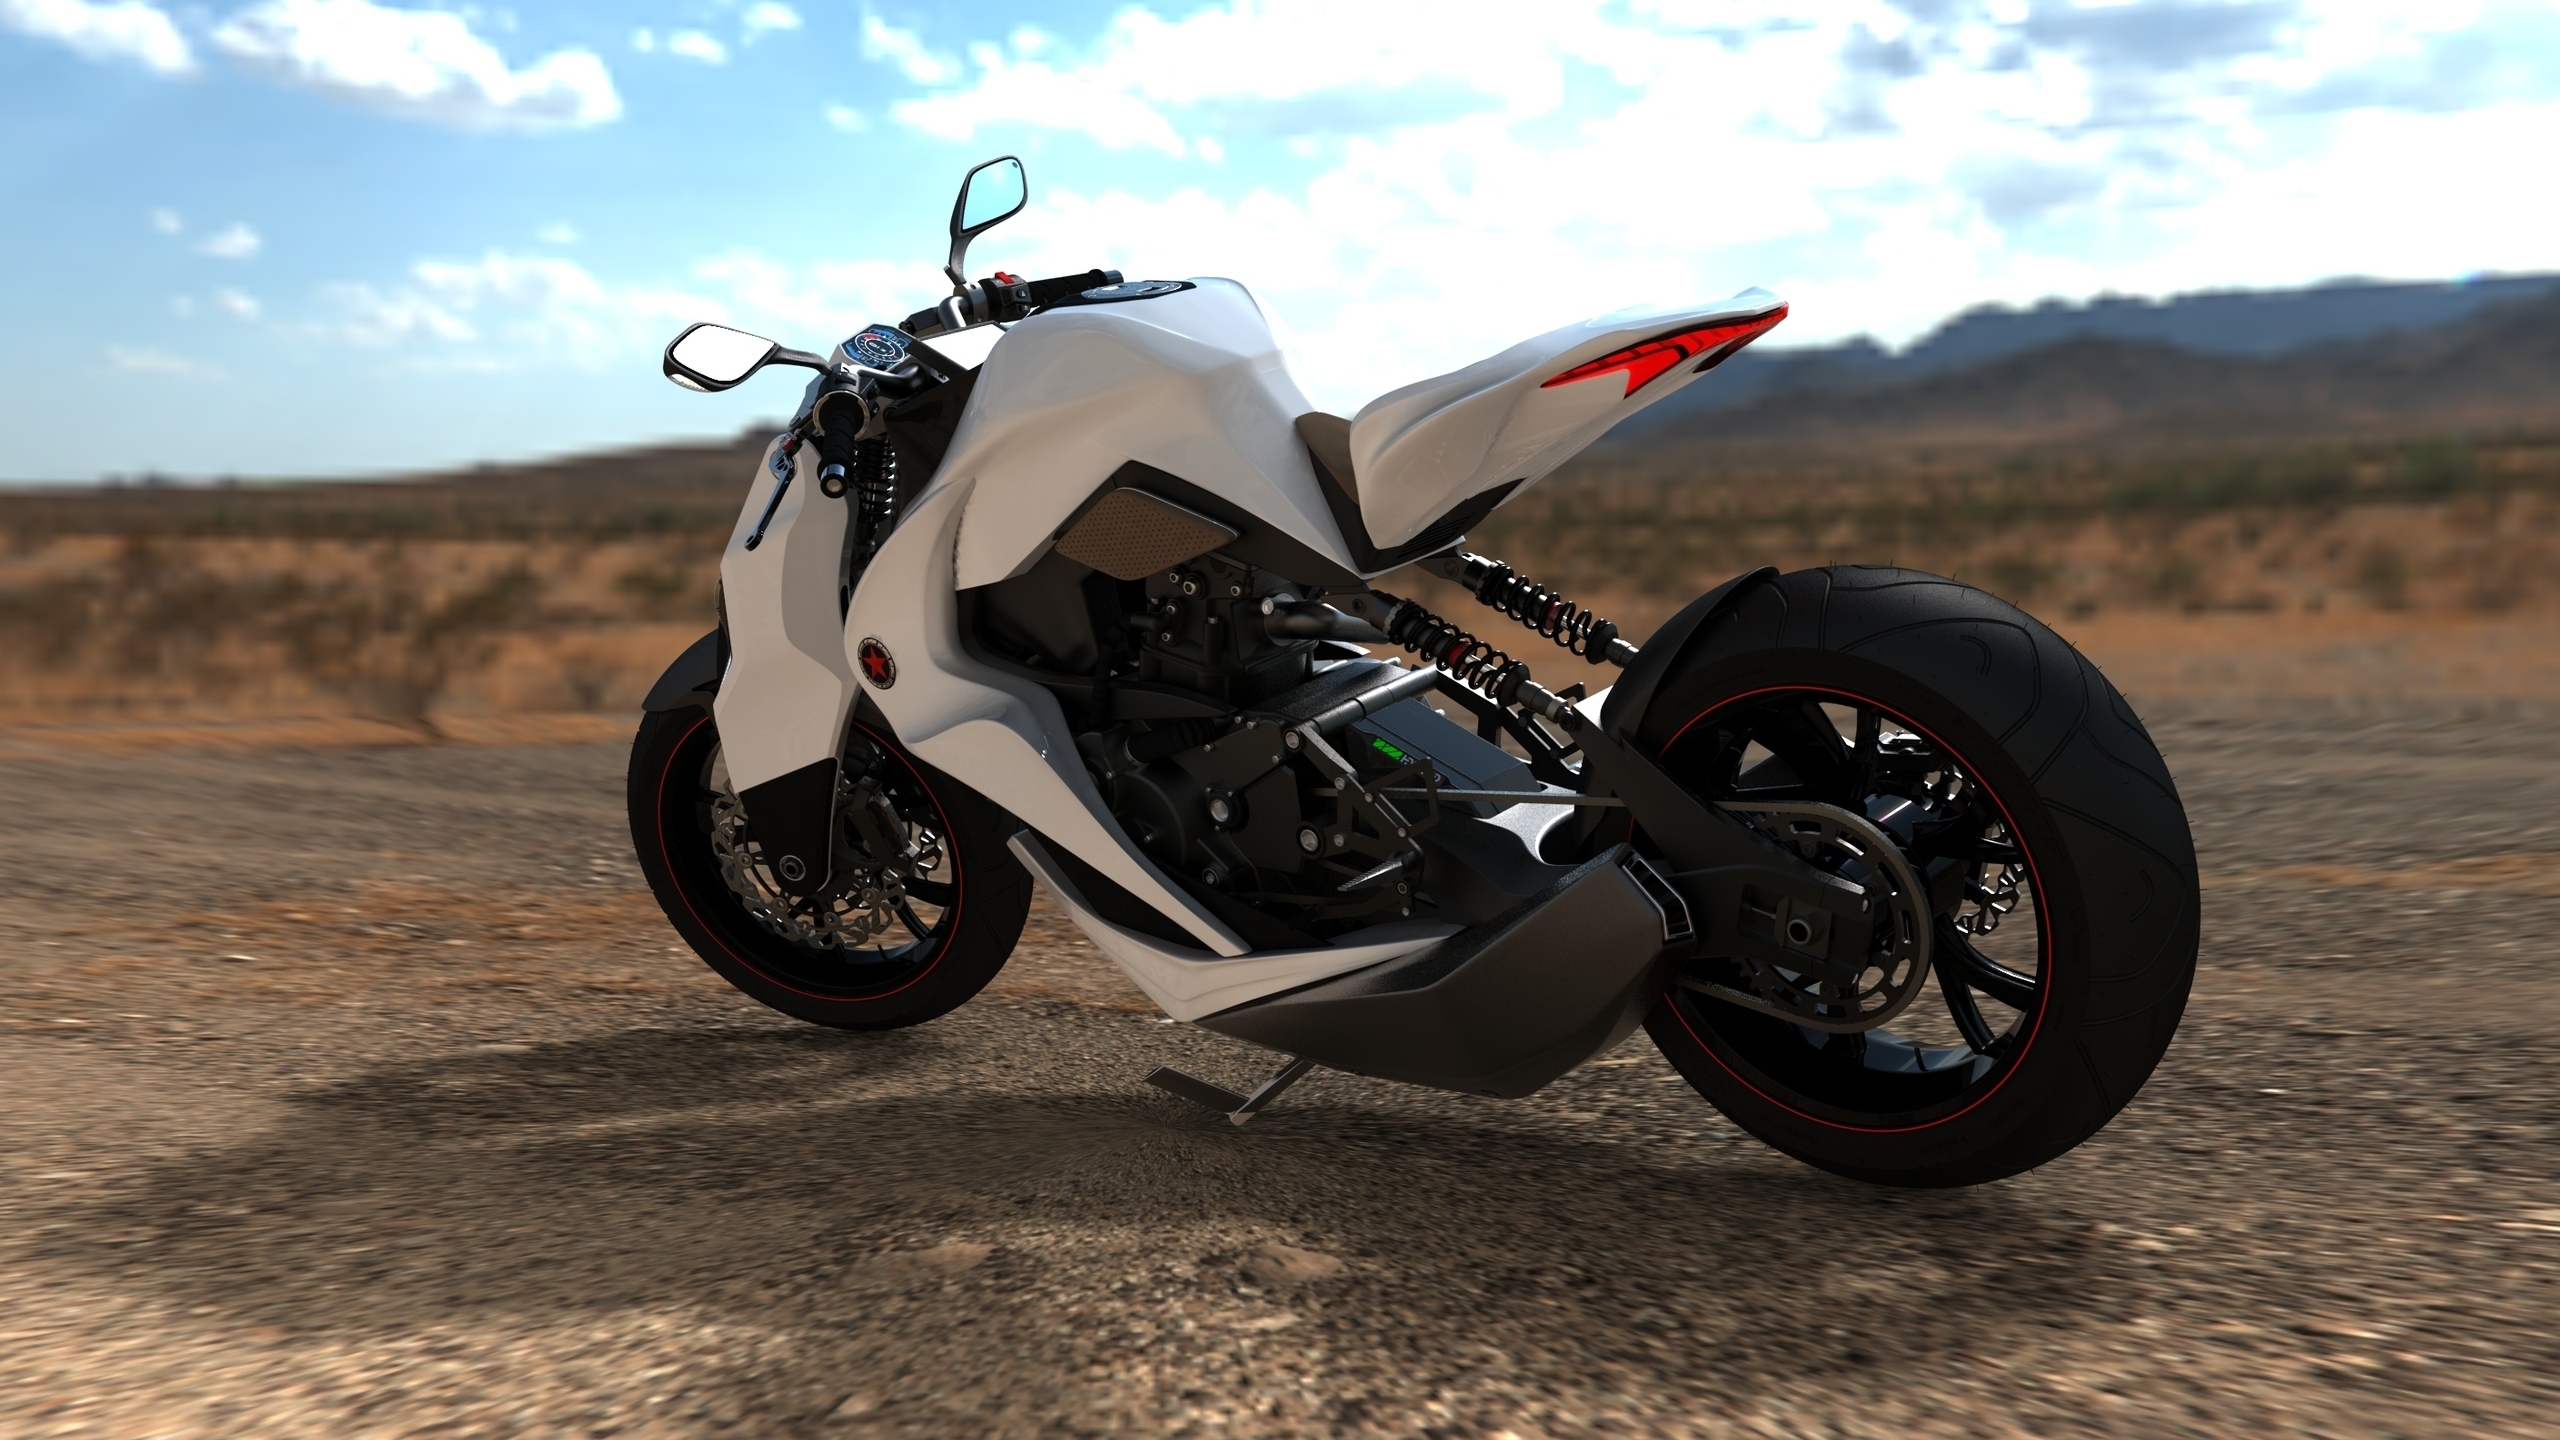 2012 Hybrid Motorcycle Concept for 2560x1440 HDTV resolution